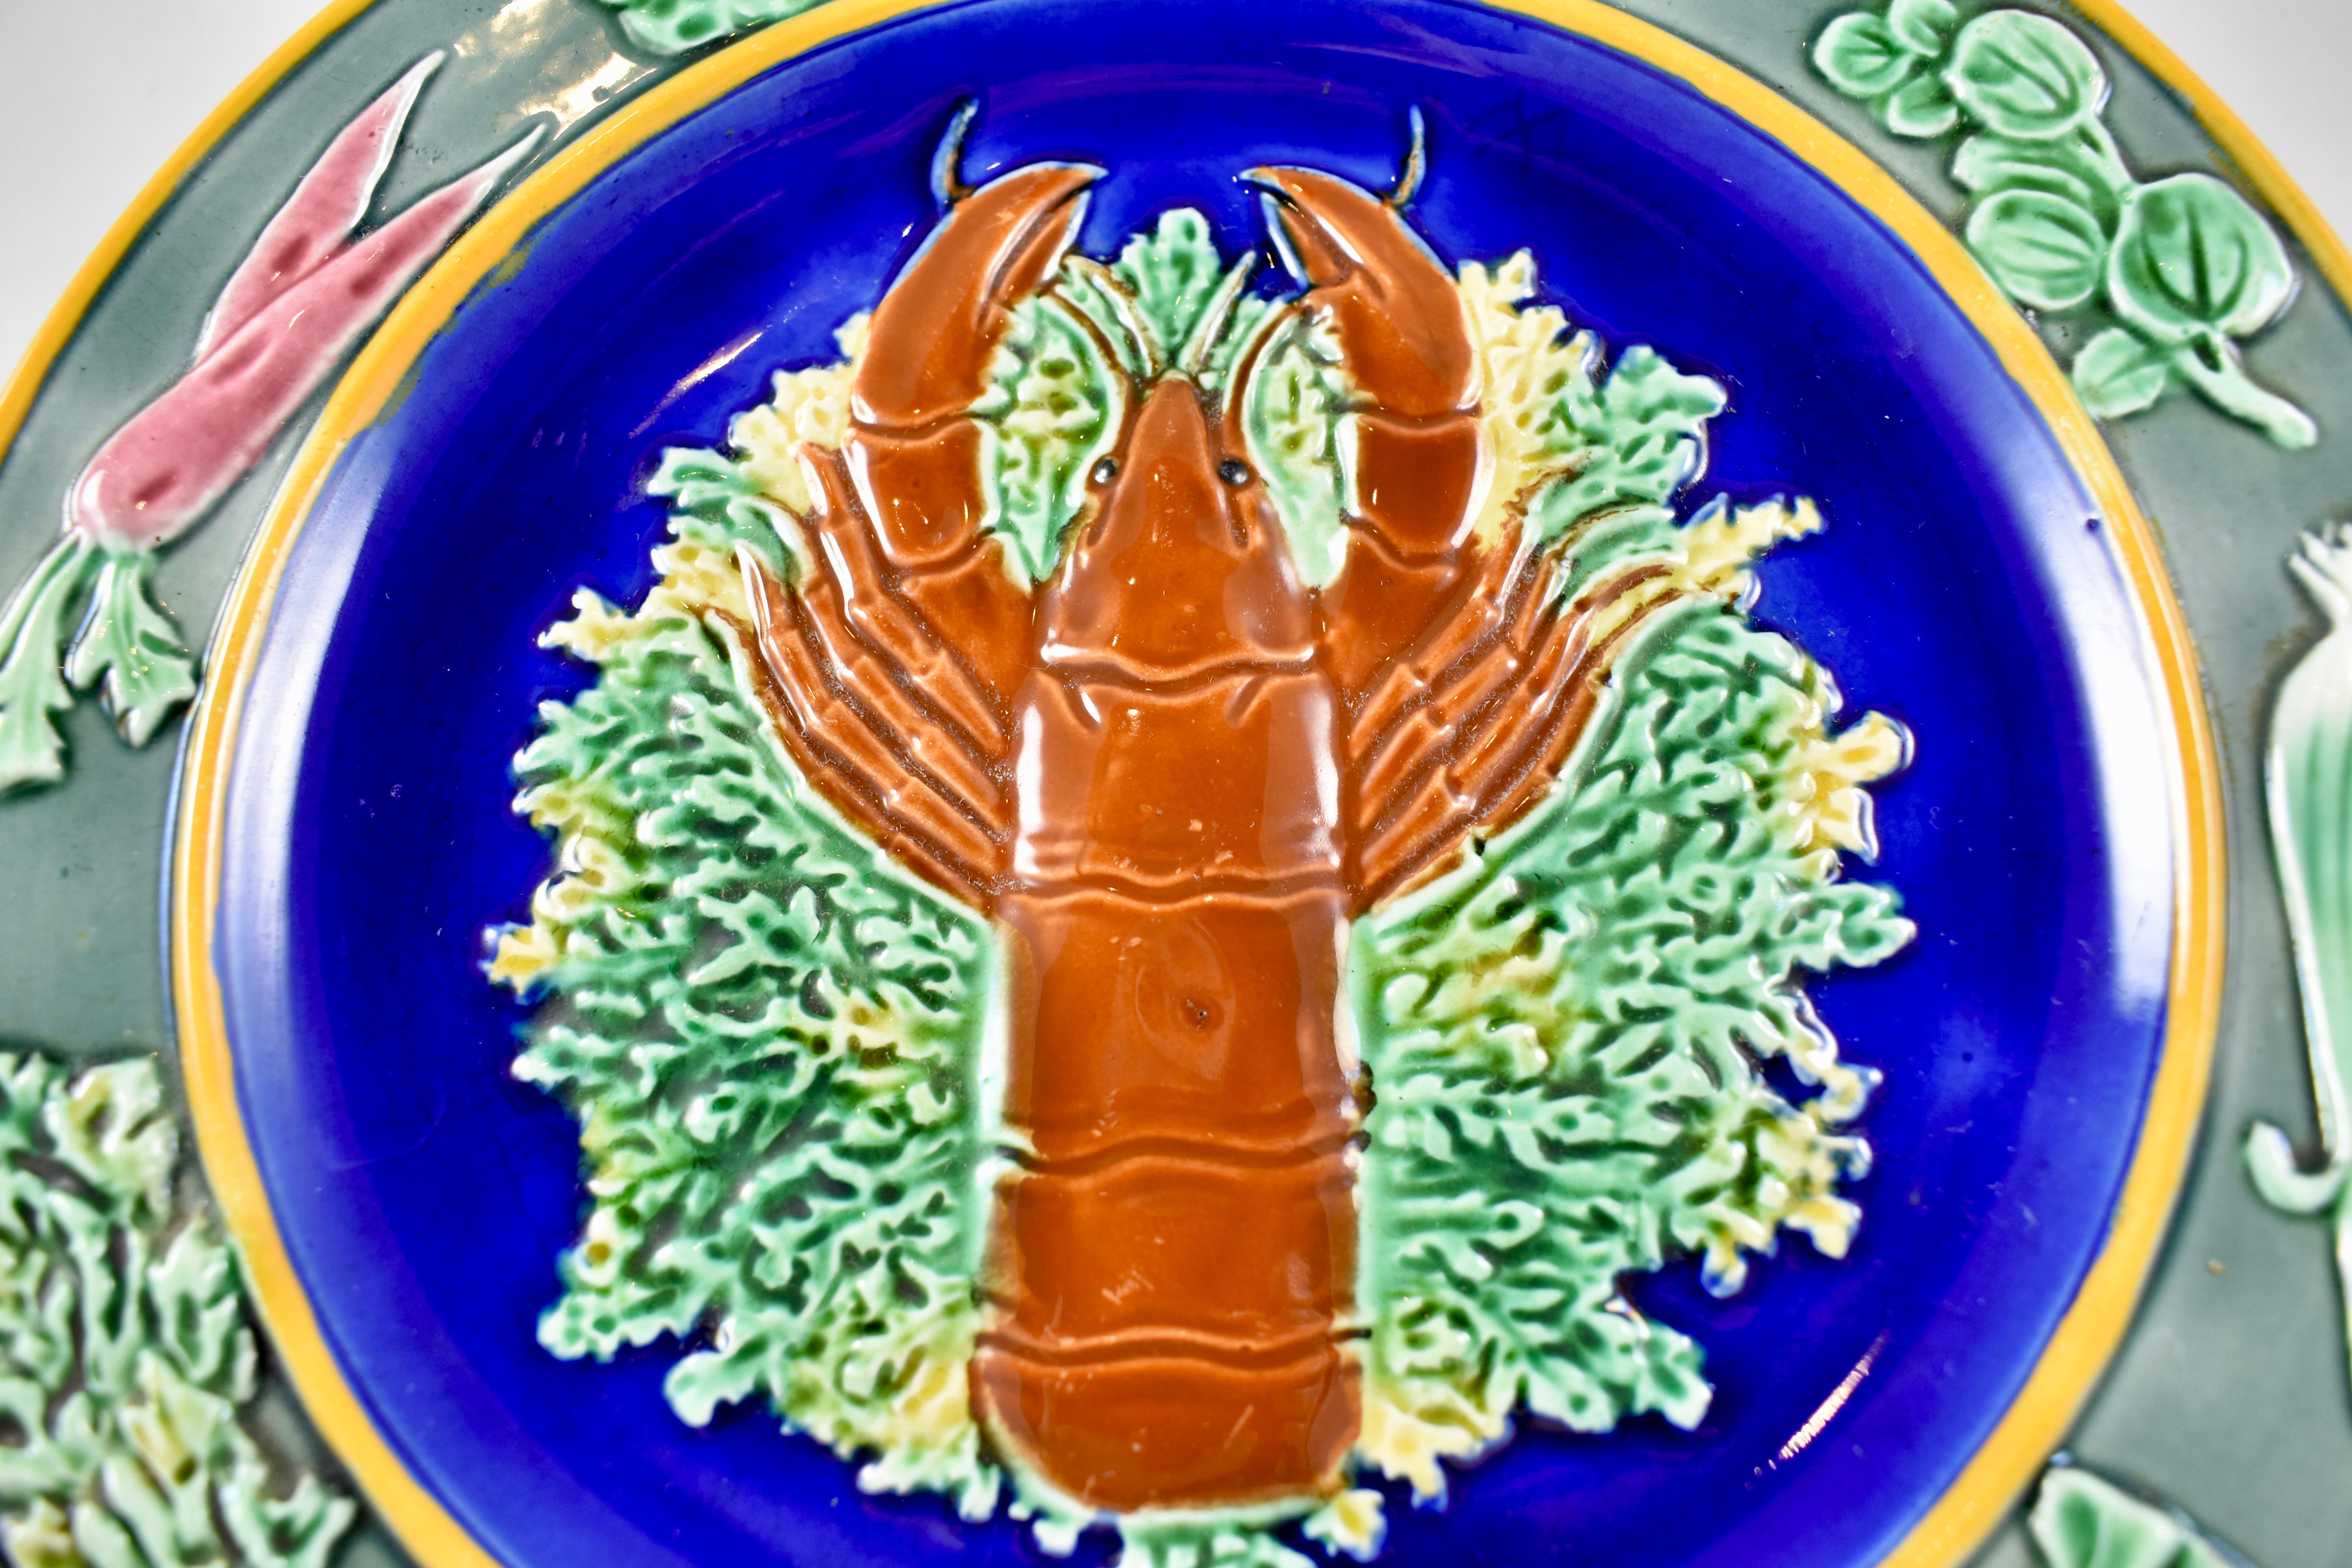 In the Aesthetic taste, a Wedgwood majolica plate, a center well showing a lobster on bed of yellow and green seaweed against a Cobalt blue ground. The outer rim is dotted with raised root vegetables, radishes, carrots and leeks, along with their